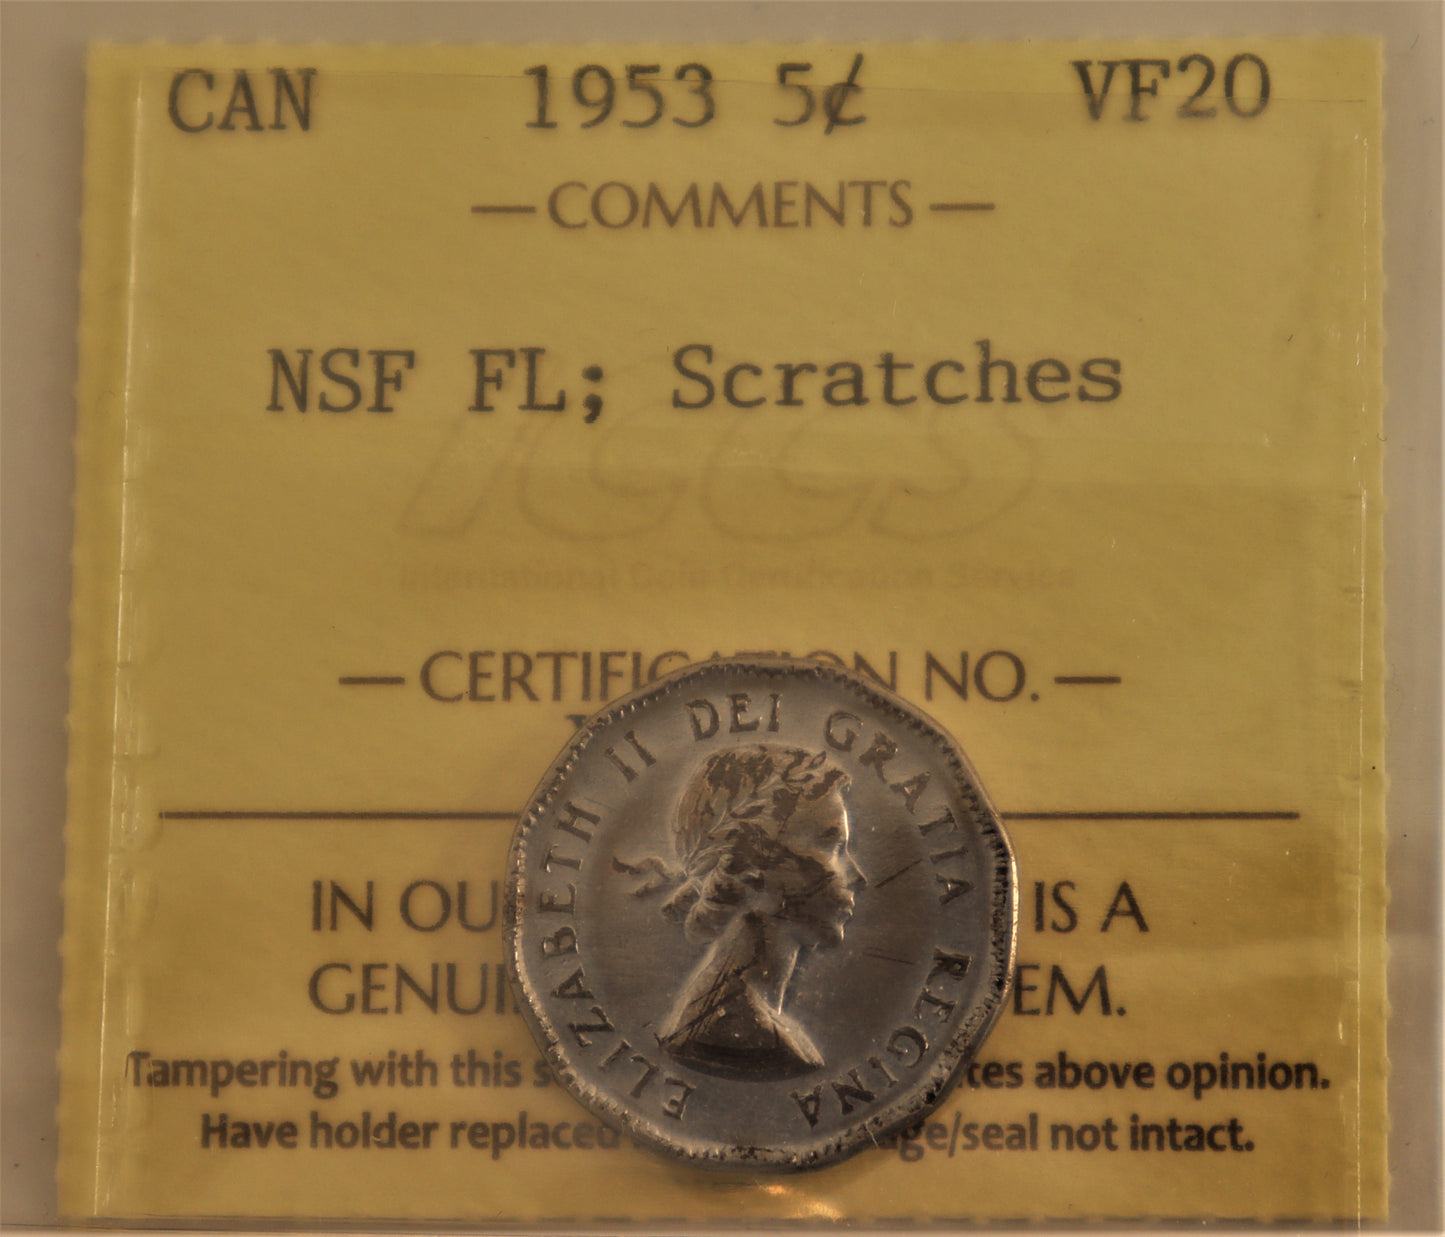 1953 5 Cent Coin No Shoulder Fold, Far Maple Leaf, Scratches, ICCS Grade VF-20 Cert# XYL 582